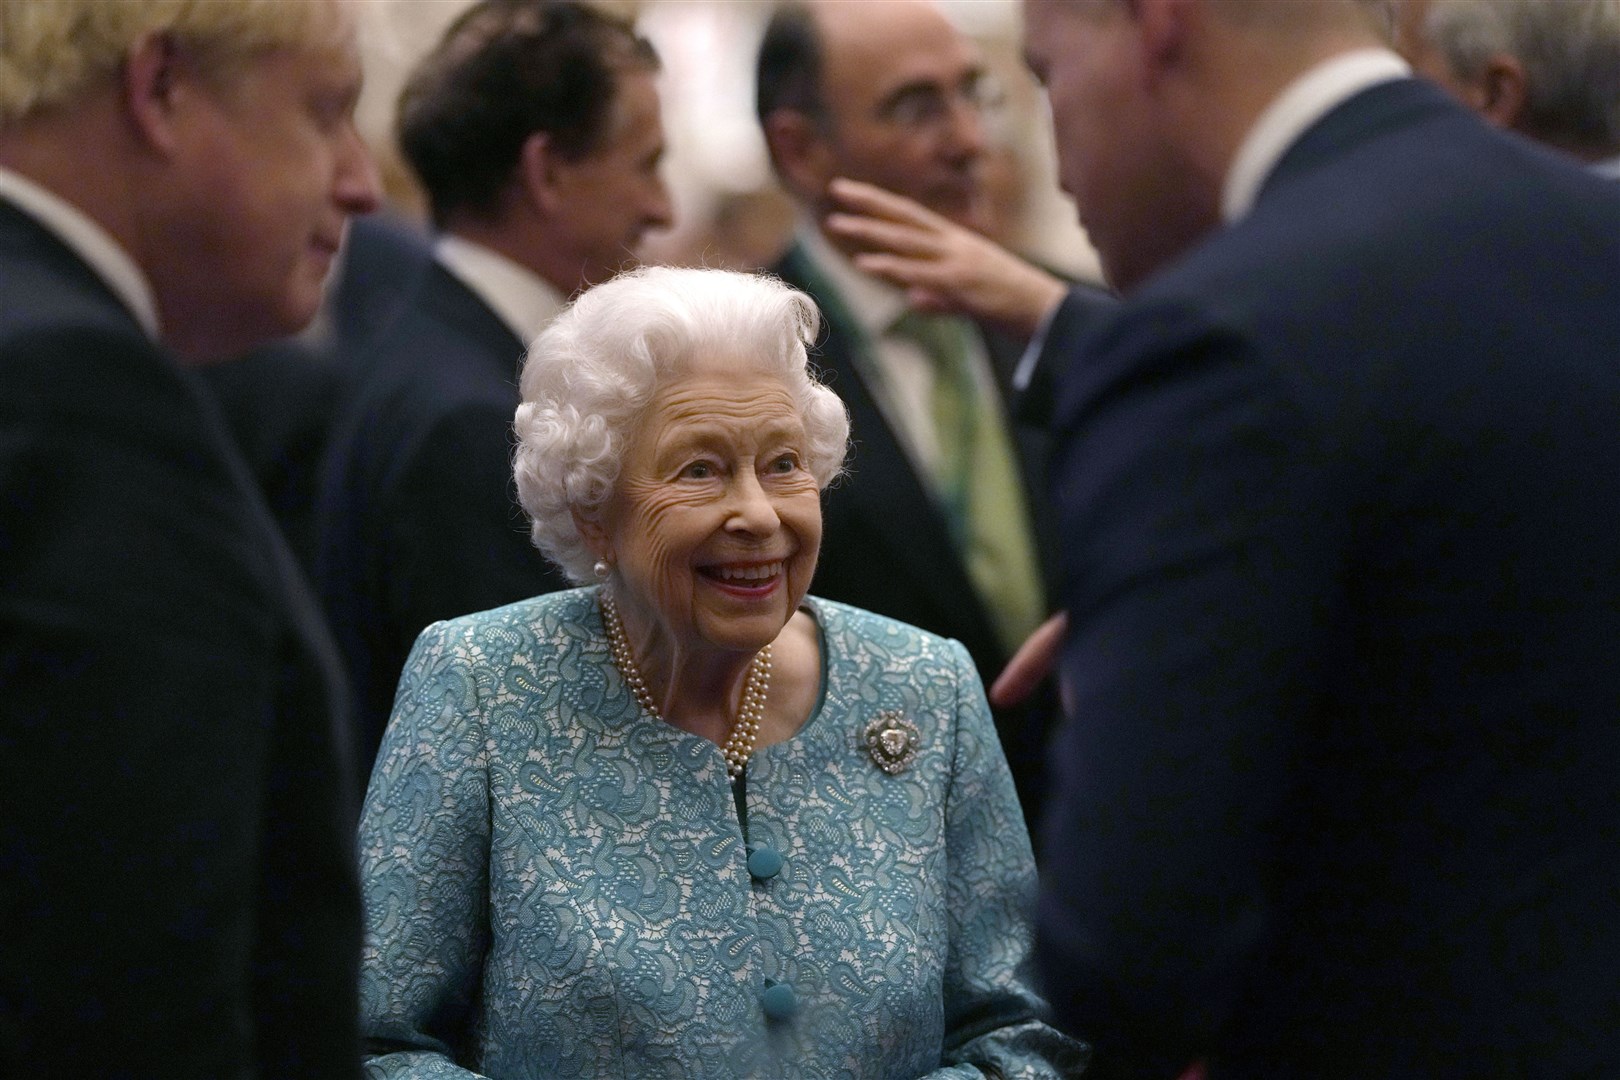 The Queen at a reception for business leaders on October 10 (Alastair Grant/PA)